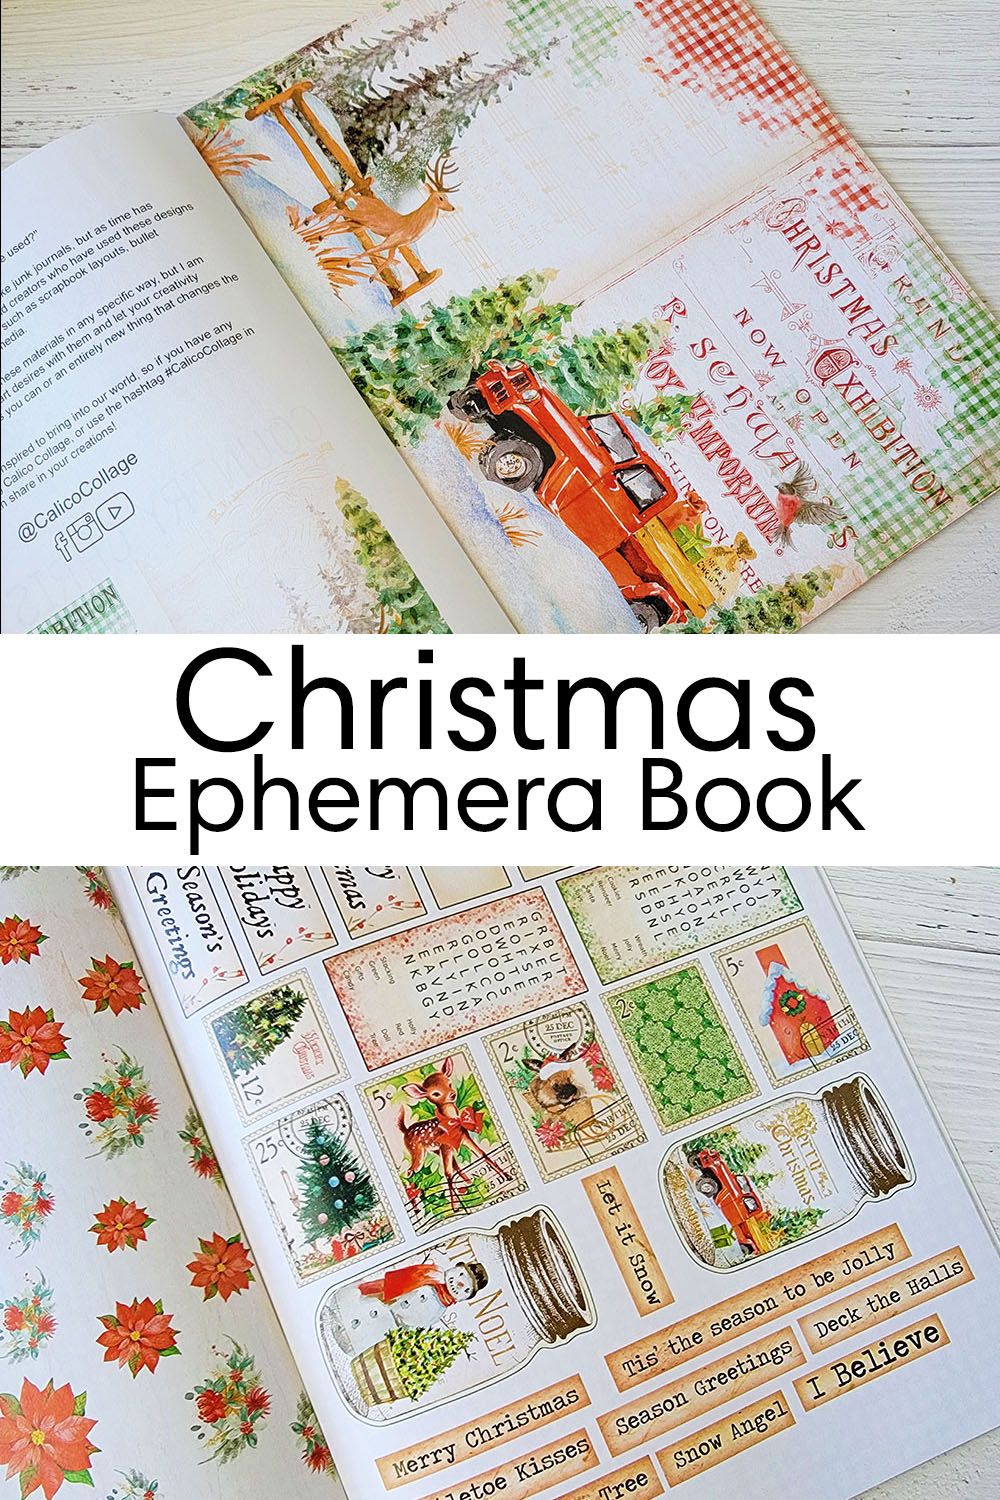 Country Christmas Ephemera Book for Junk Journals